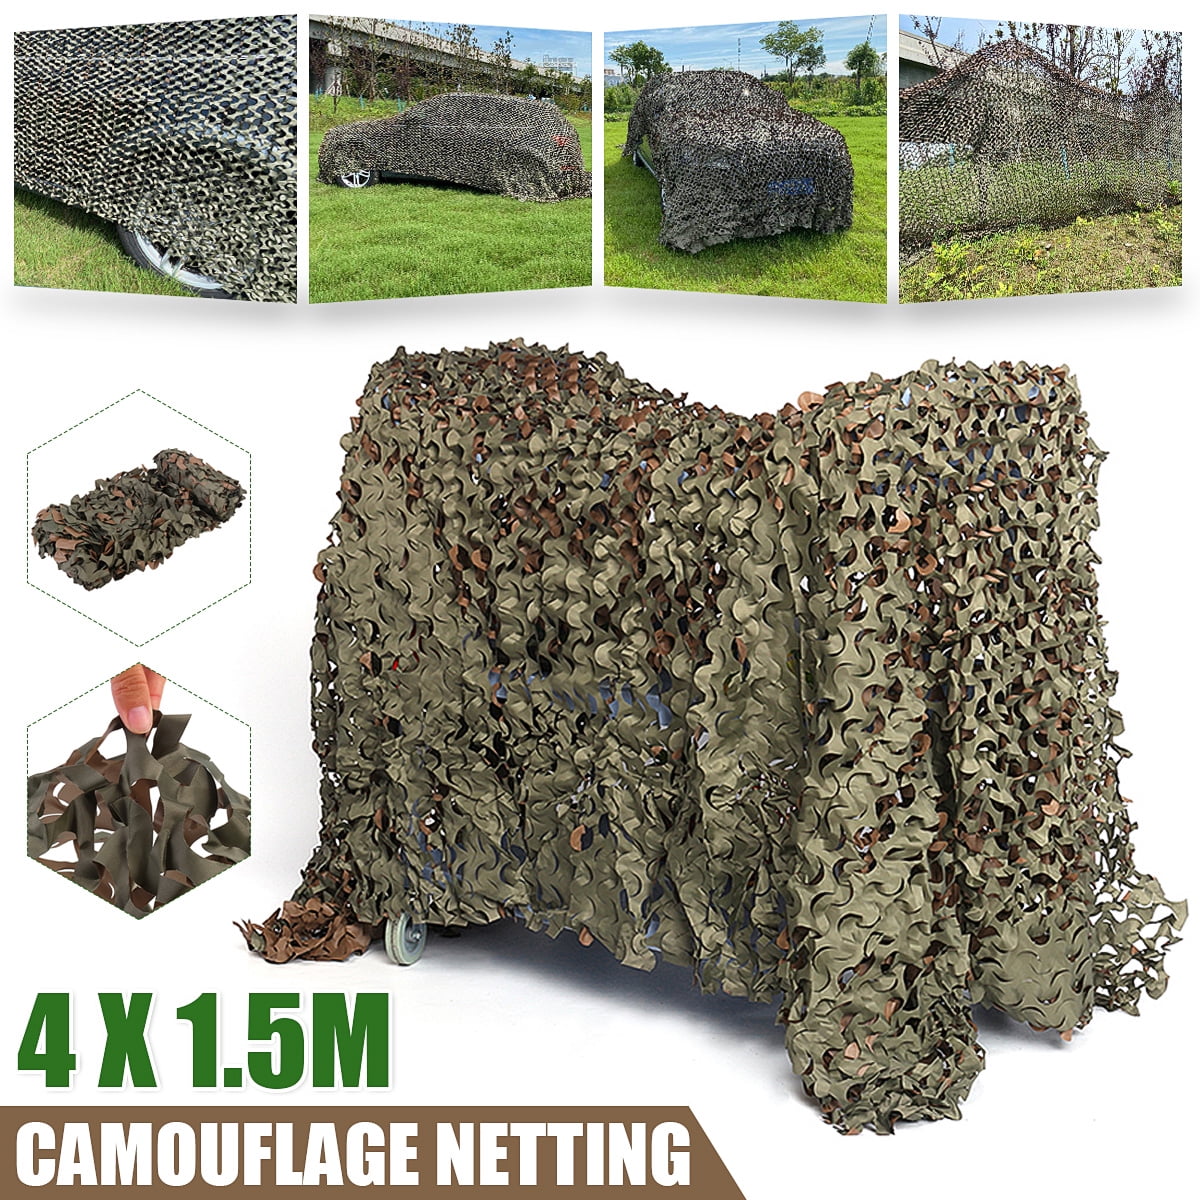 Army Sunshade Fence Net Camouflage Tarp Rope Nets Photograph Car Cover Stealth Camping Military Canopy Blind for Hunting culpeo Camo Netting Party Decoration